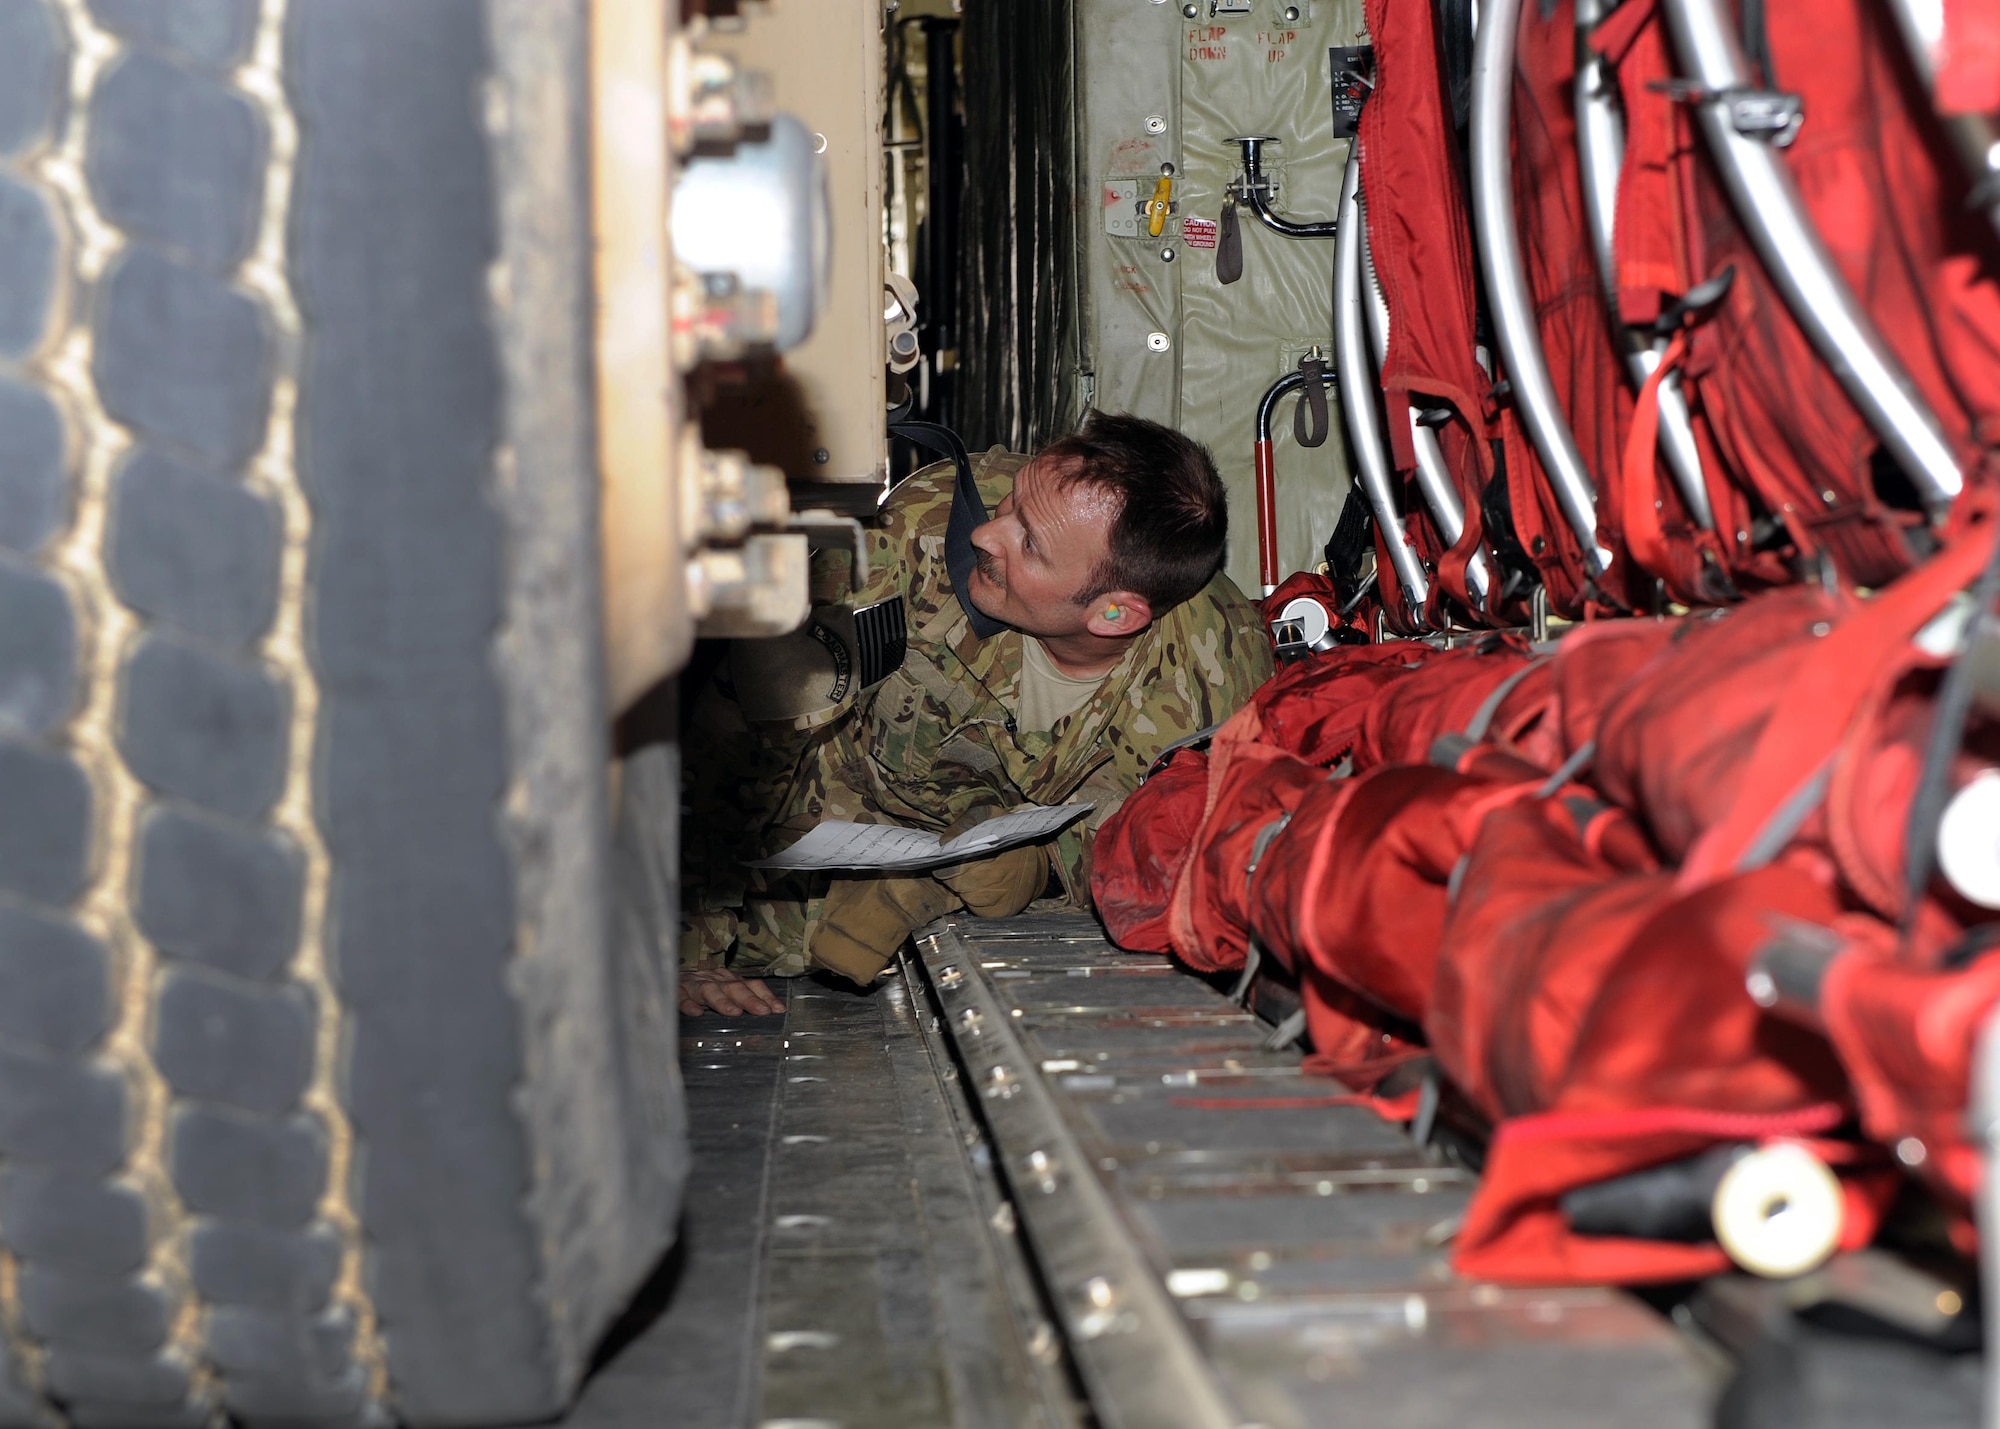 U.S. Air Force Senior Master Sgt. Jason Buttke, 774th Expeditionary Airlift Squadron loadmaster, maneuvers from the back of the cargo compartment of a C-130J Super Hercules aircraft to the front while inspecting the tie-downs securing an R-11 fuel truck to the aircraft March 15, 2015. The ability to forward deploy mission critical equipment, such as the R-11, to key sites throughout the AOR is more imperative than ever before as the Air Force reduces its footprint in the region. (U.S. Air Force photo by Staff Sgt. Whitney Amstutz)